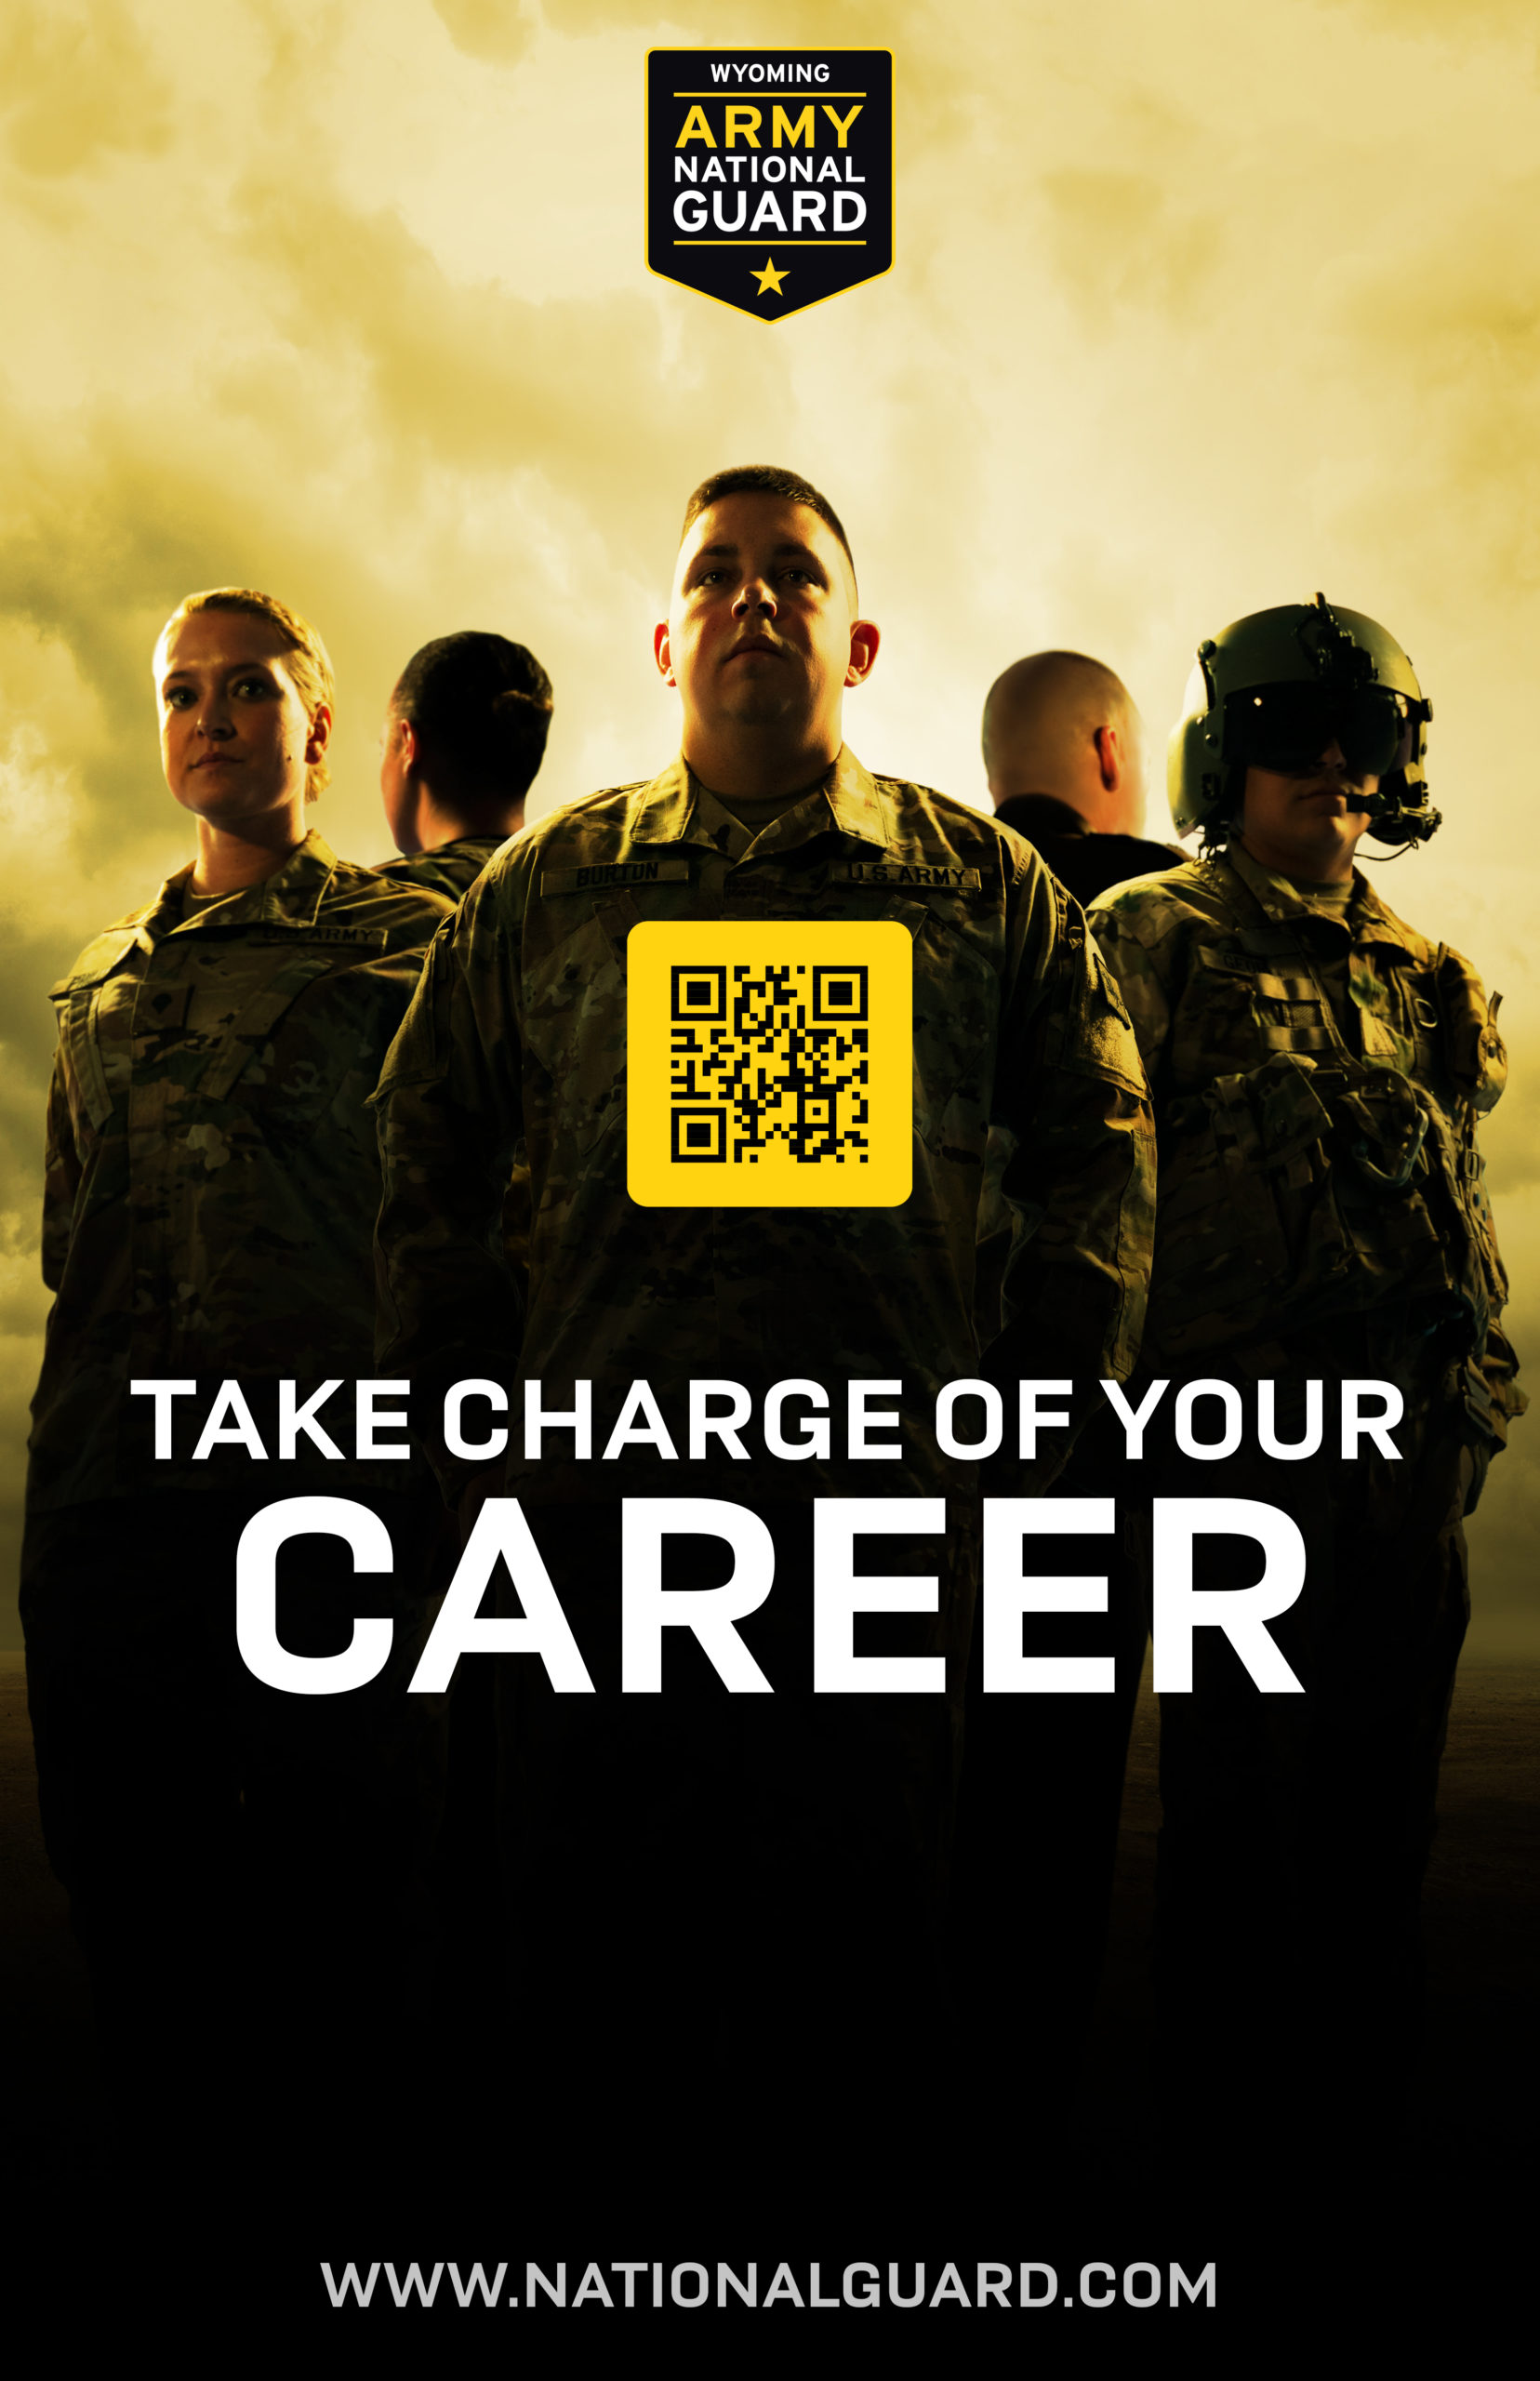 Poster with people dressed in National Guard Uniforms against a yellow background. The text reads "Take charge of your career"